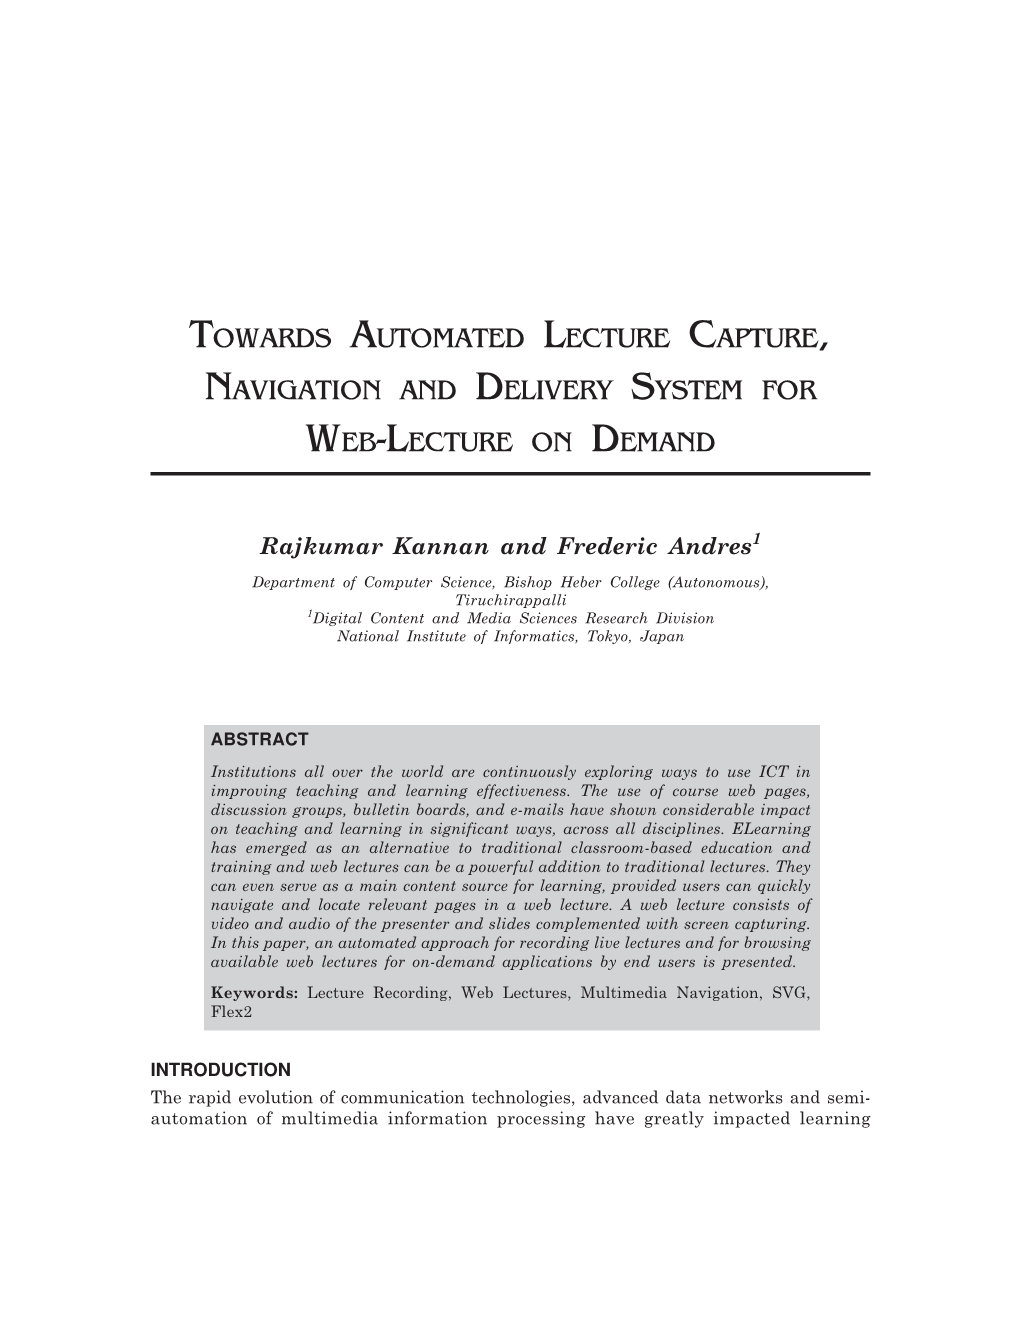 Towards Automated Lecture Capture, Navigation and Delivery System for Web-Lecture on Demand